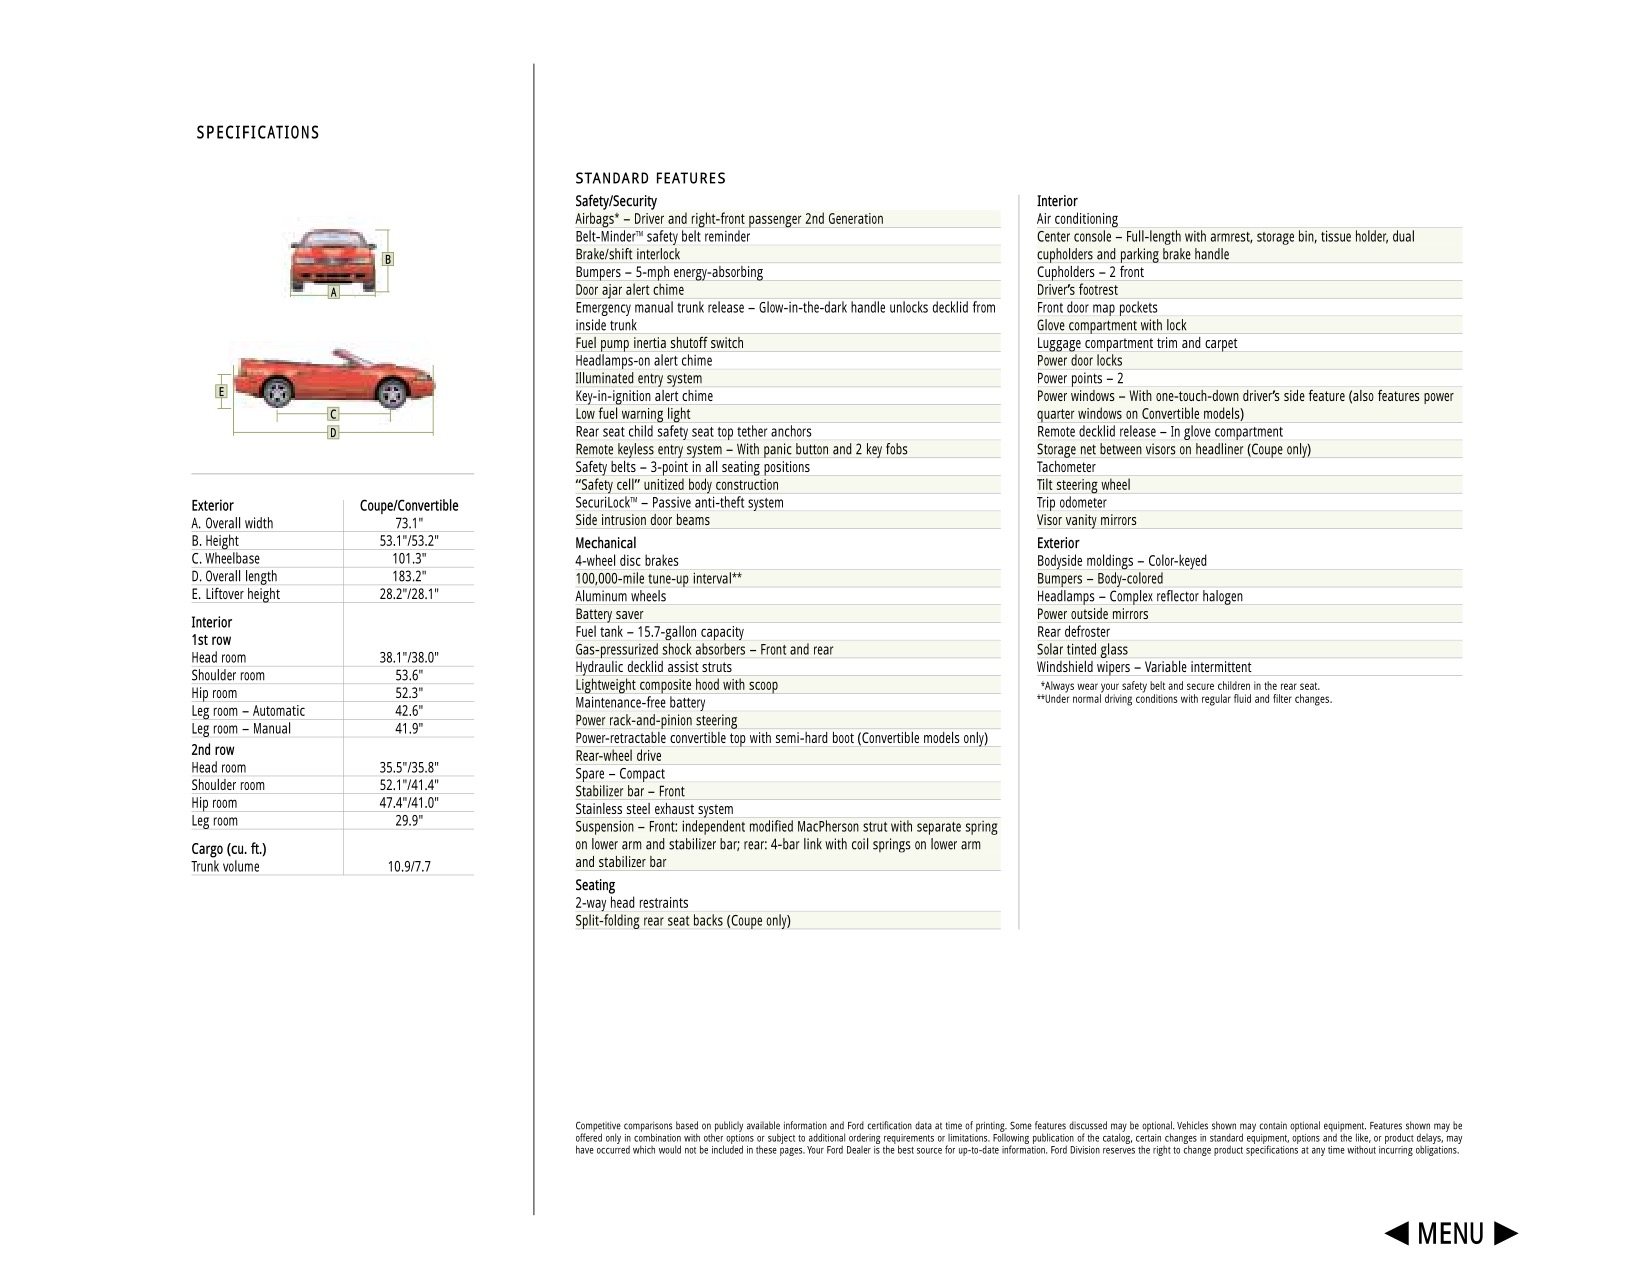 2003 Ford Mustang Brochure Page 2